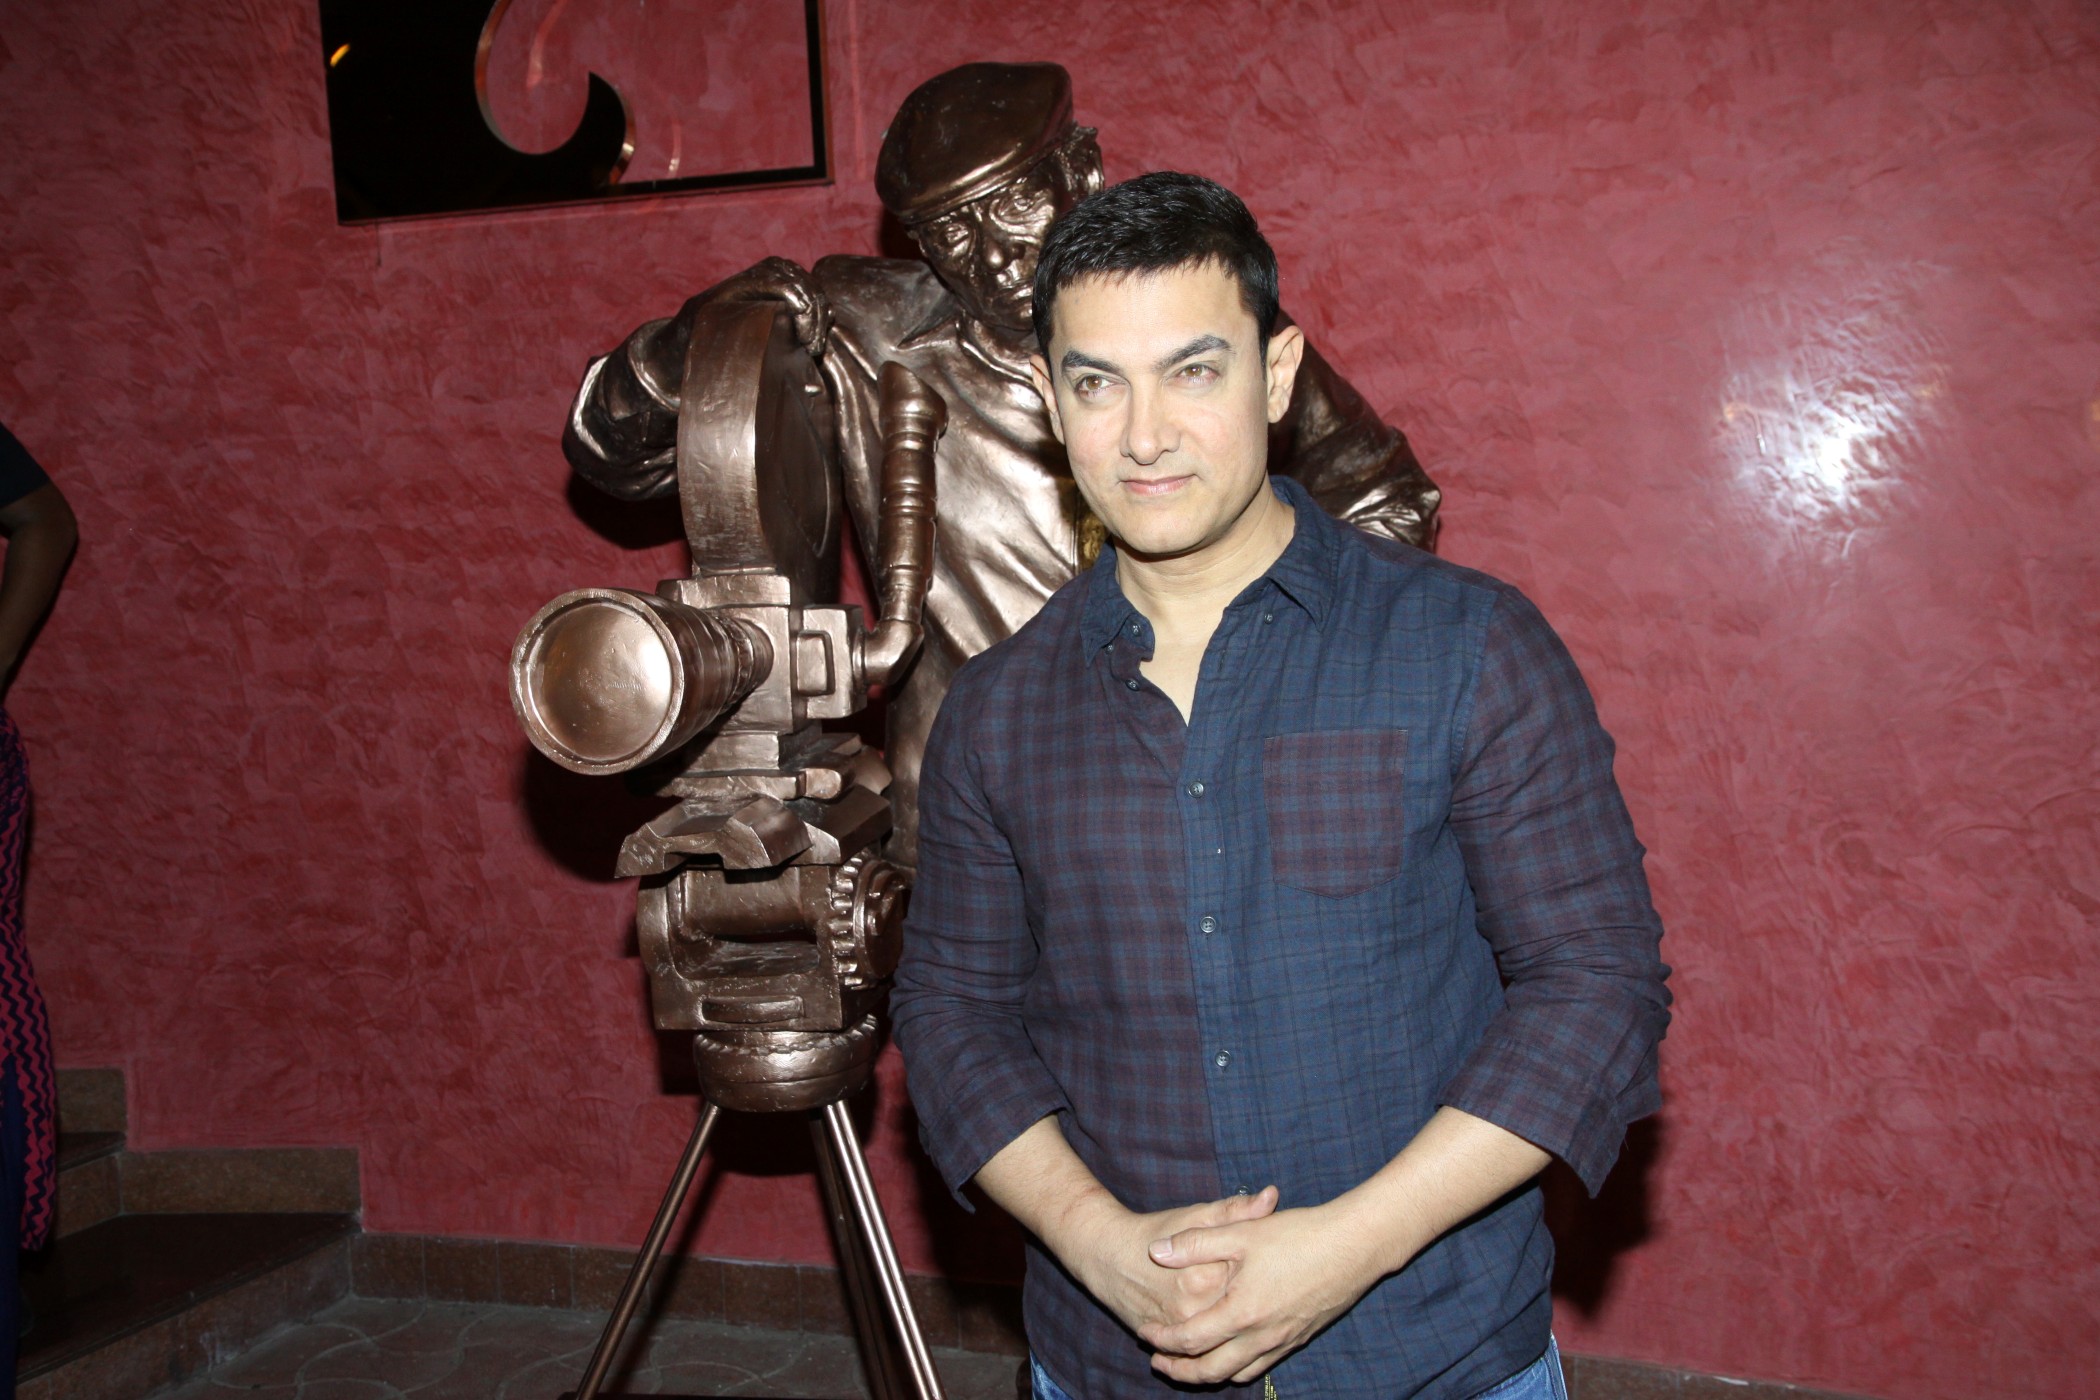 Aamir Khan Presents His Documentary Movie Chale Chalo Pics